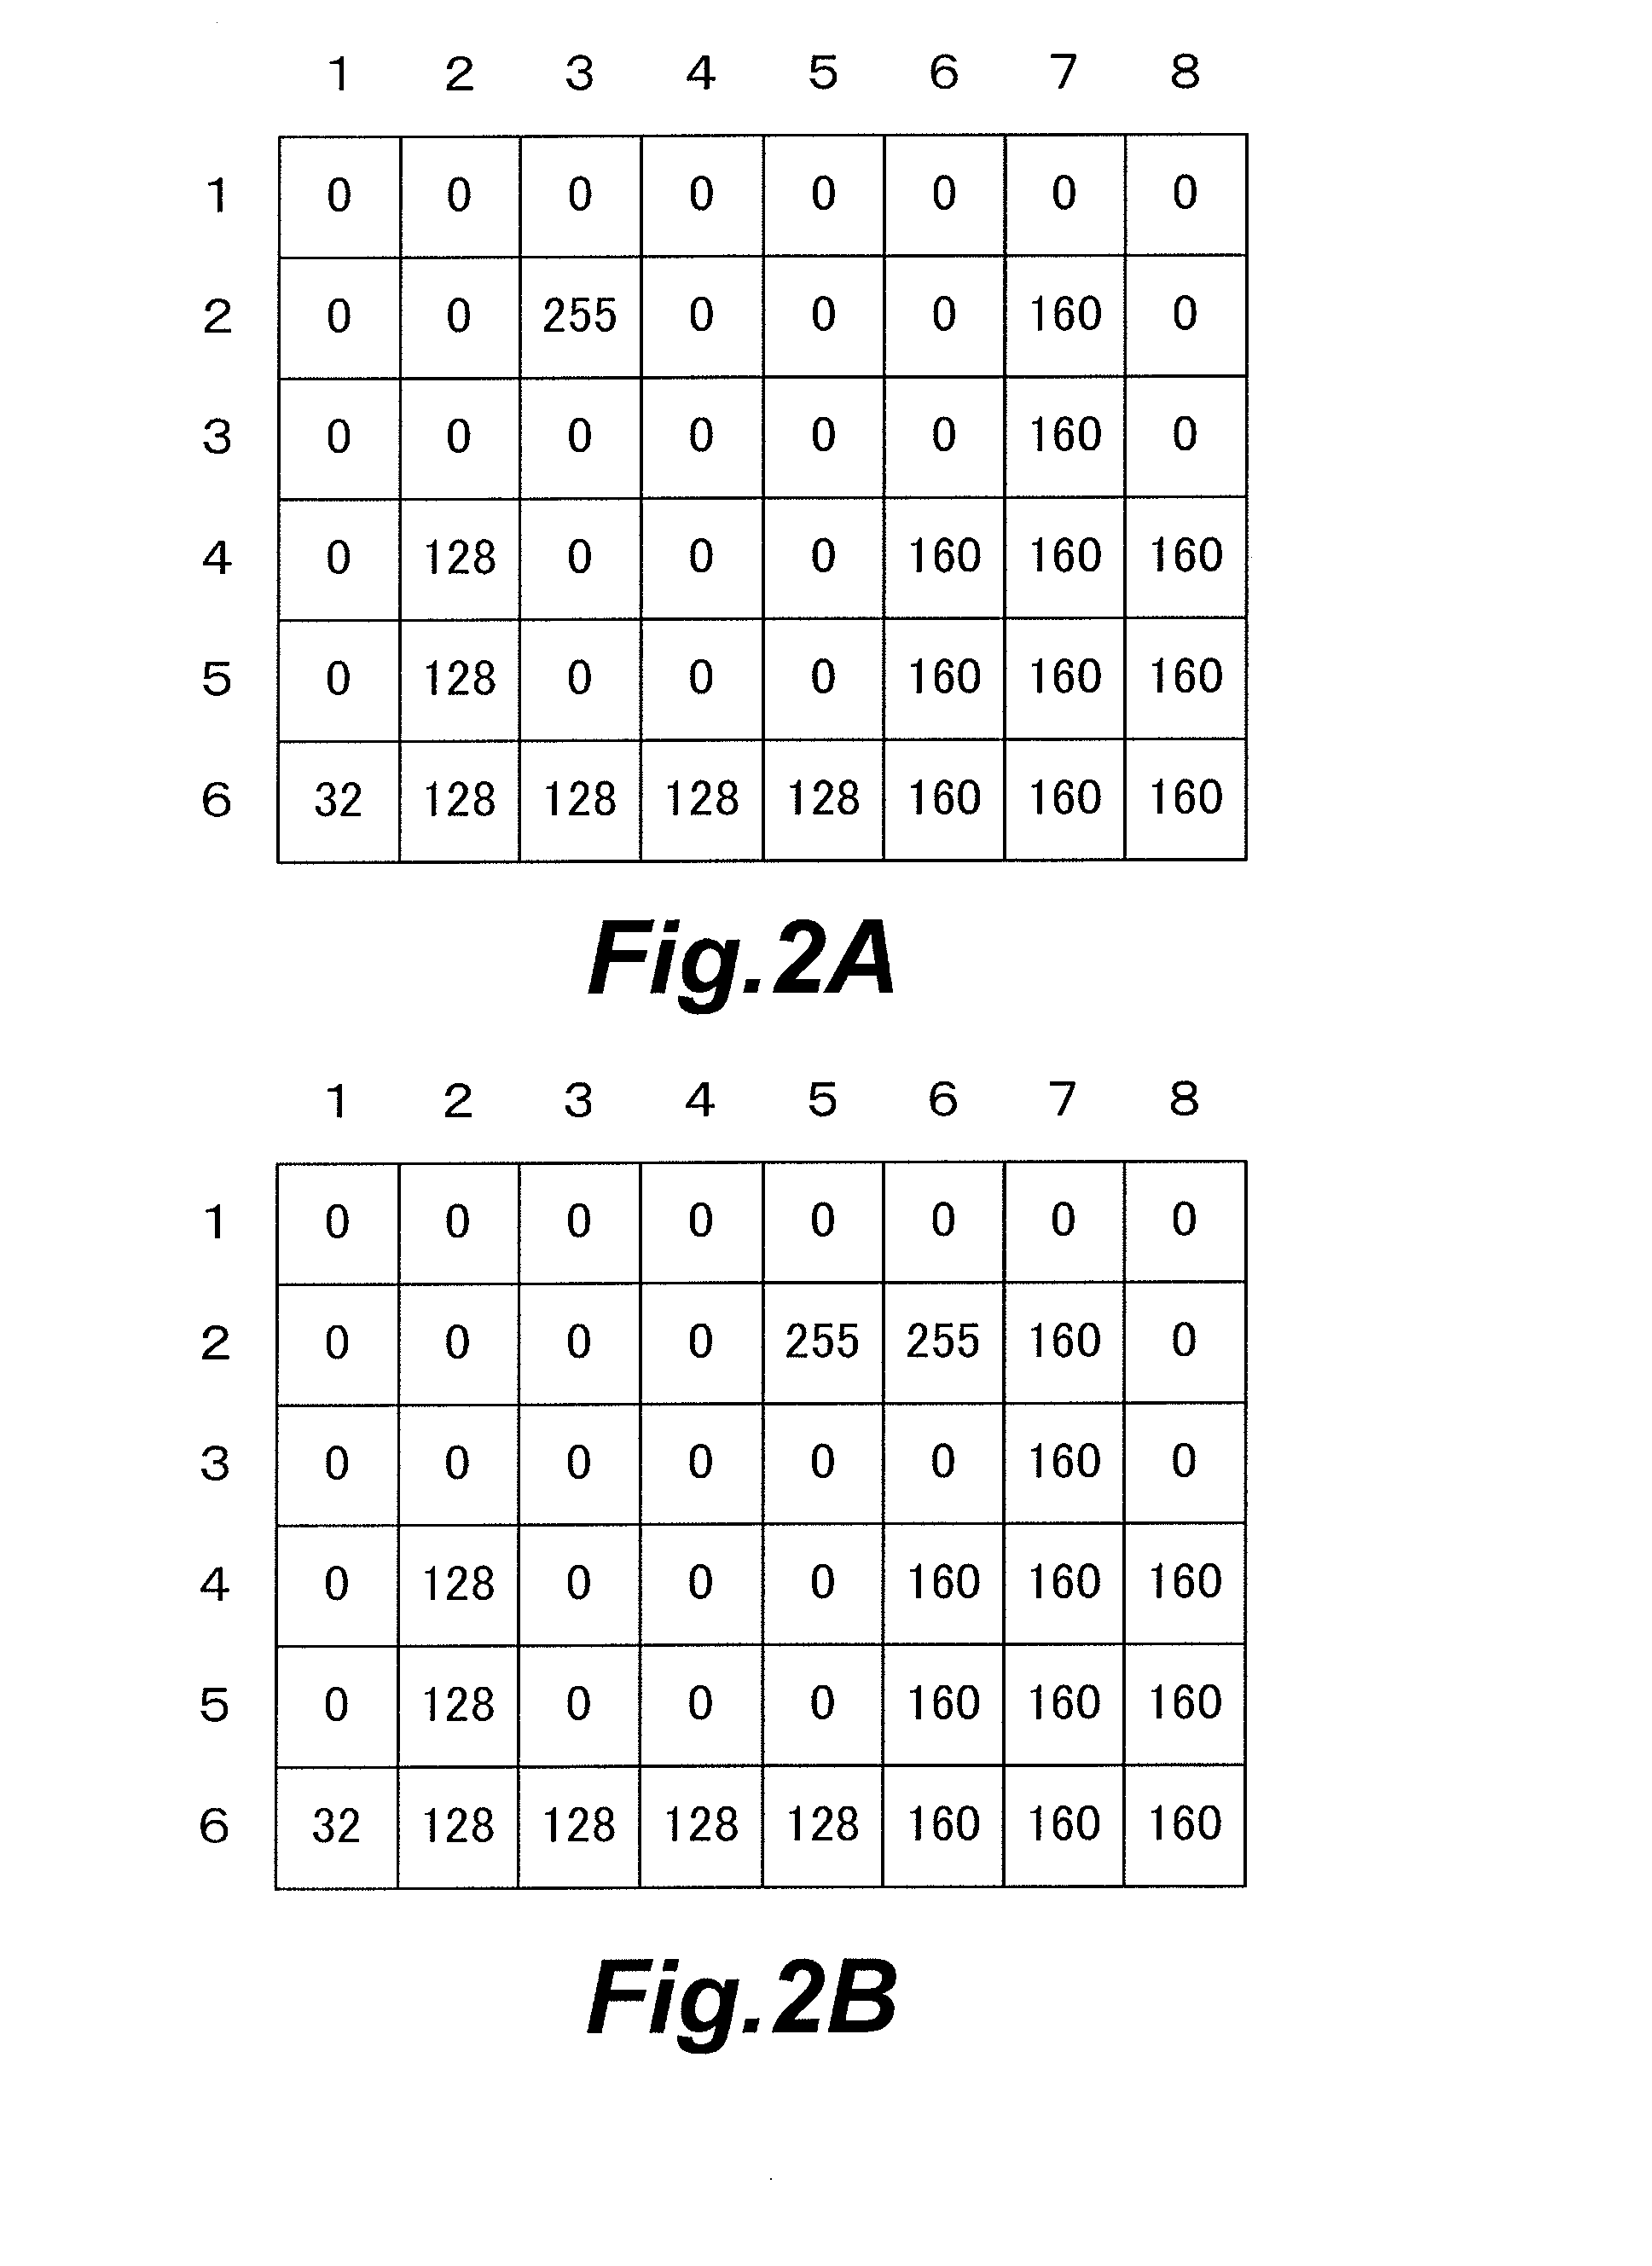 Image display apparatus and method of controlling same